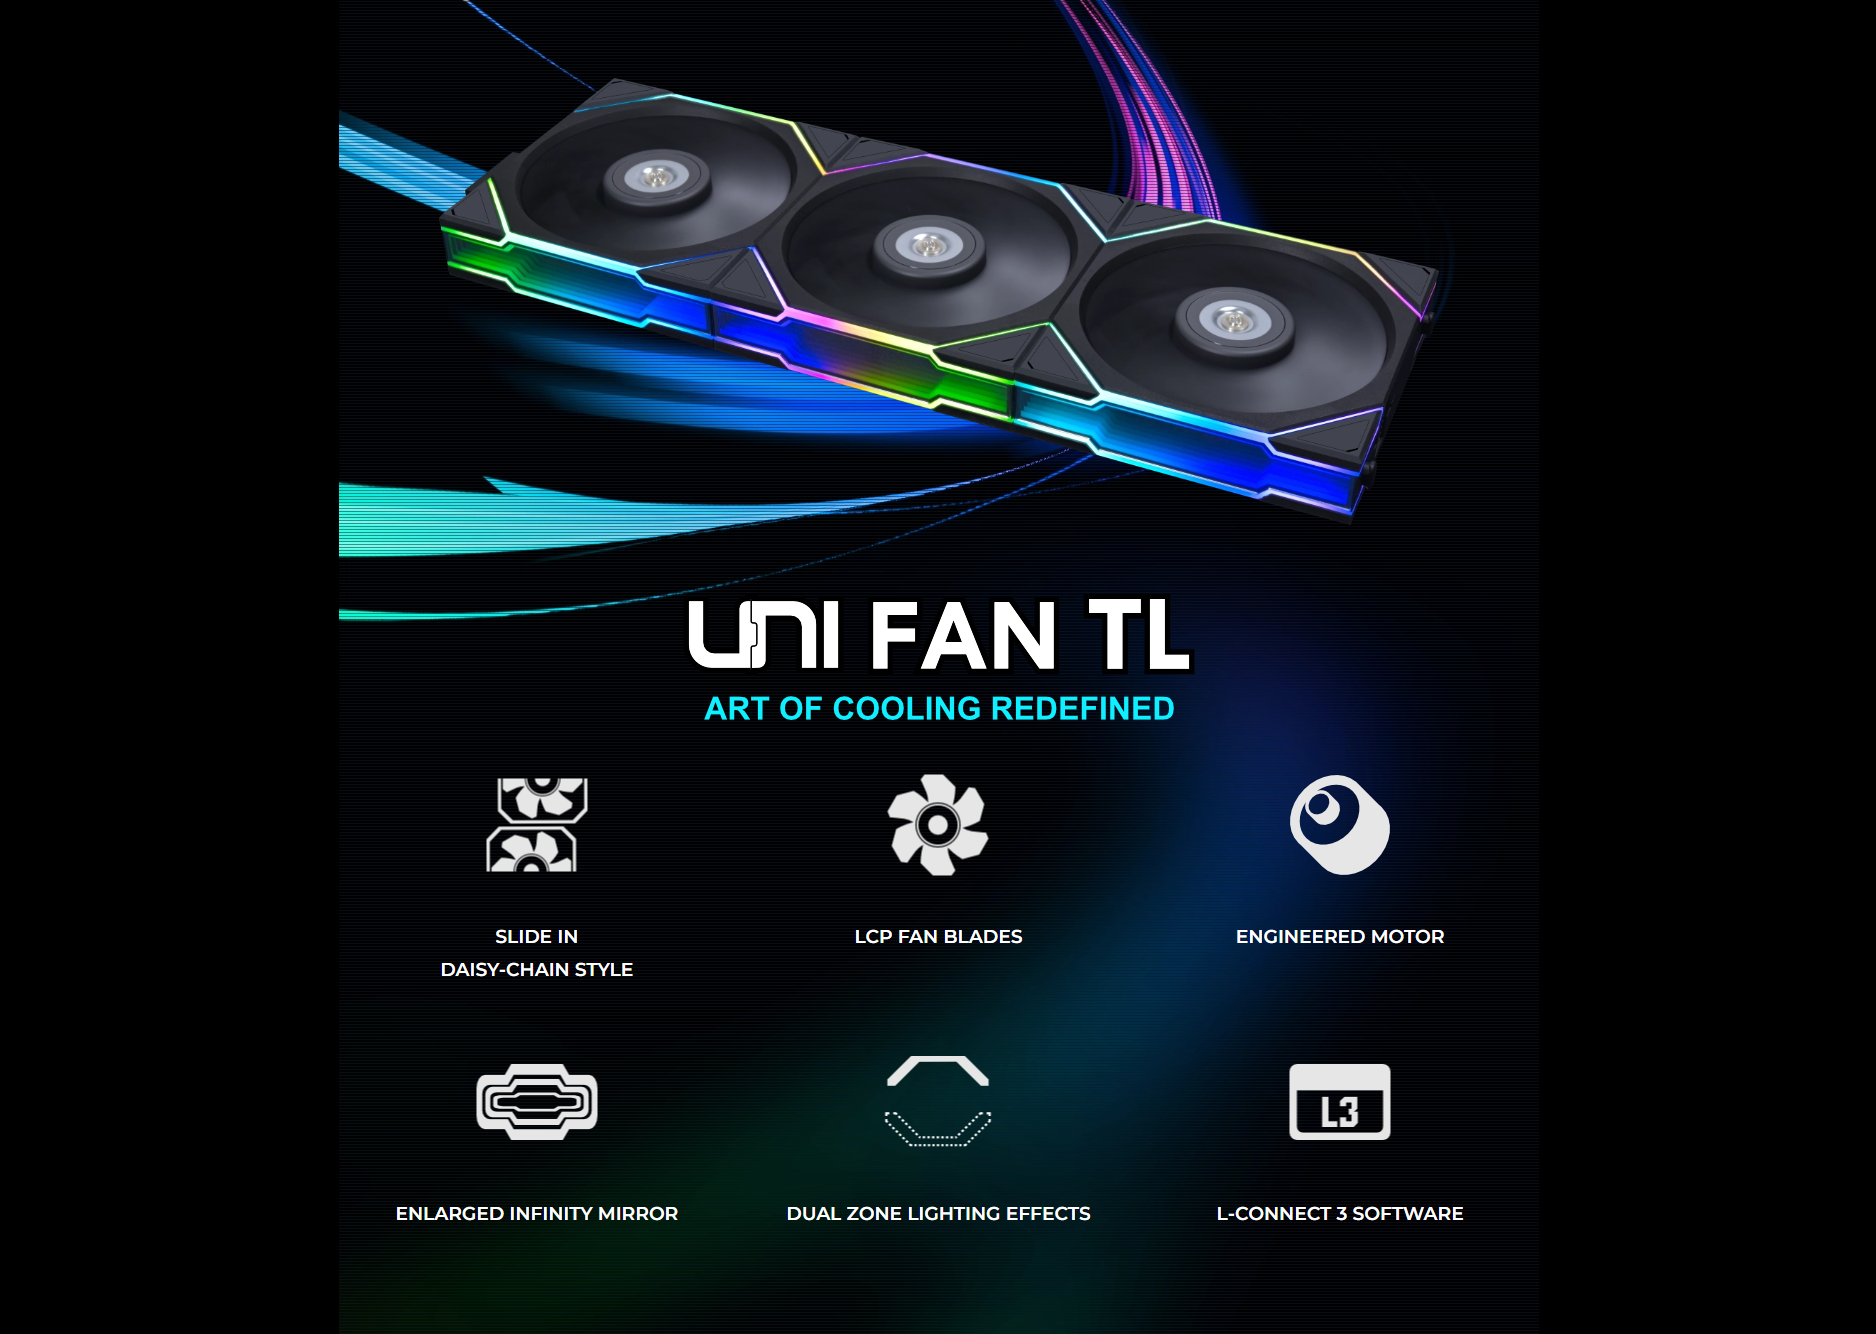 A large marketing image providing additional information about the product Lian Li UNI Fan TL 120 Reverse Blade 120mm Fan Single Pack - White - Additional alt info not provided